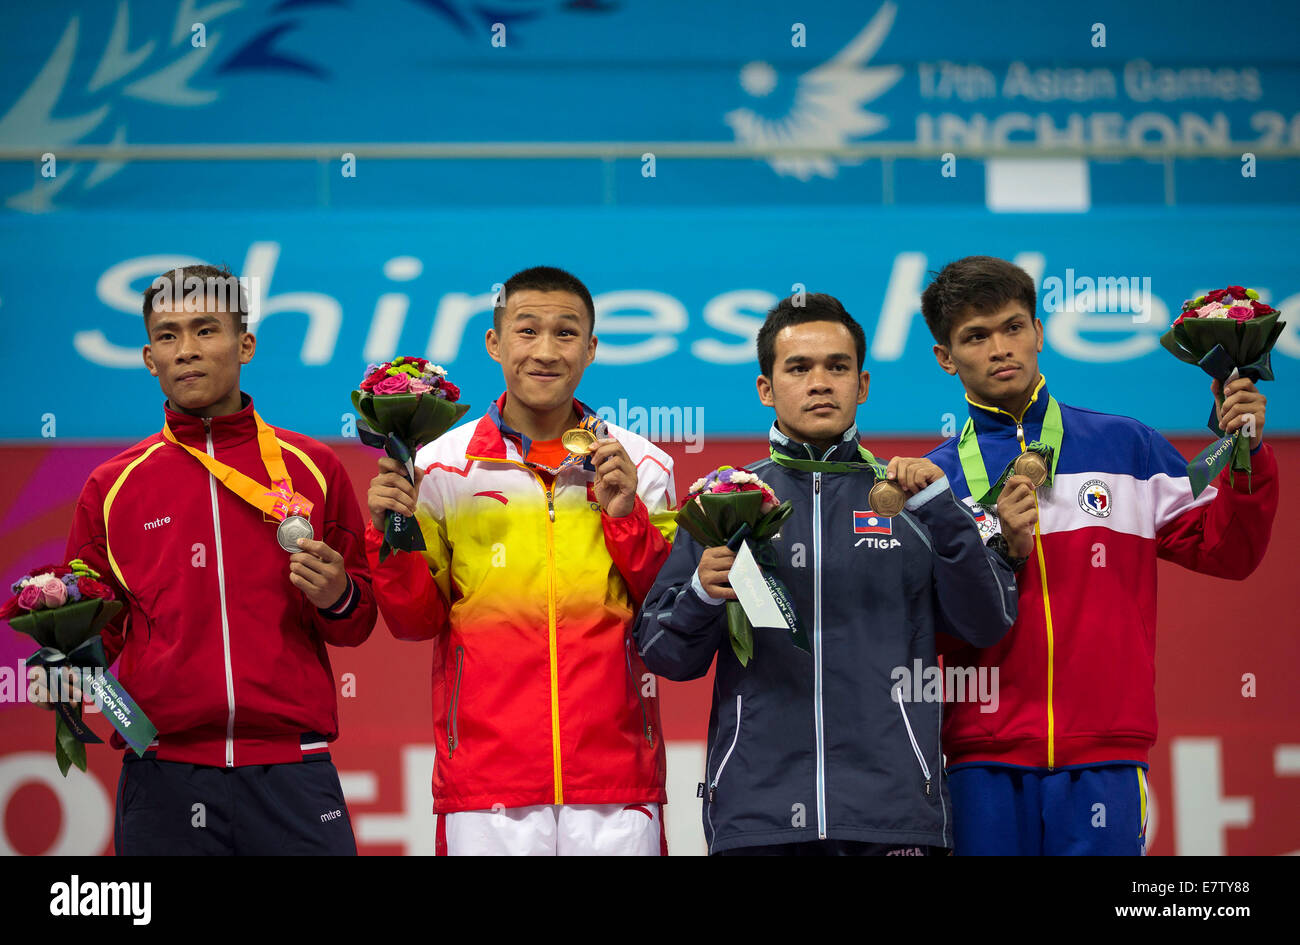 Incheon, South Korea. 24th Sep, 2014.Gold medalist Zhao Fuxiang (2nd L) of China, silver medalist Bui Truong Giang (1st L) of Vietnam, bronze medalist Soukaphone Khamla (2nd R) of Laos and Solis Franciso of Philippines pose on the podium during the awarding ceremony of men's sanda -56kg match of Wushu event at the 17th Asian Games in Incheon, South Korea, Sept. 24, 2014. (Xinhua/Fei Maohua)(lz) Stock Photo